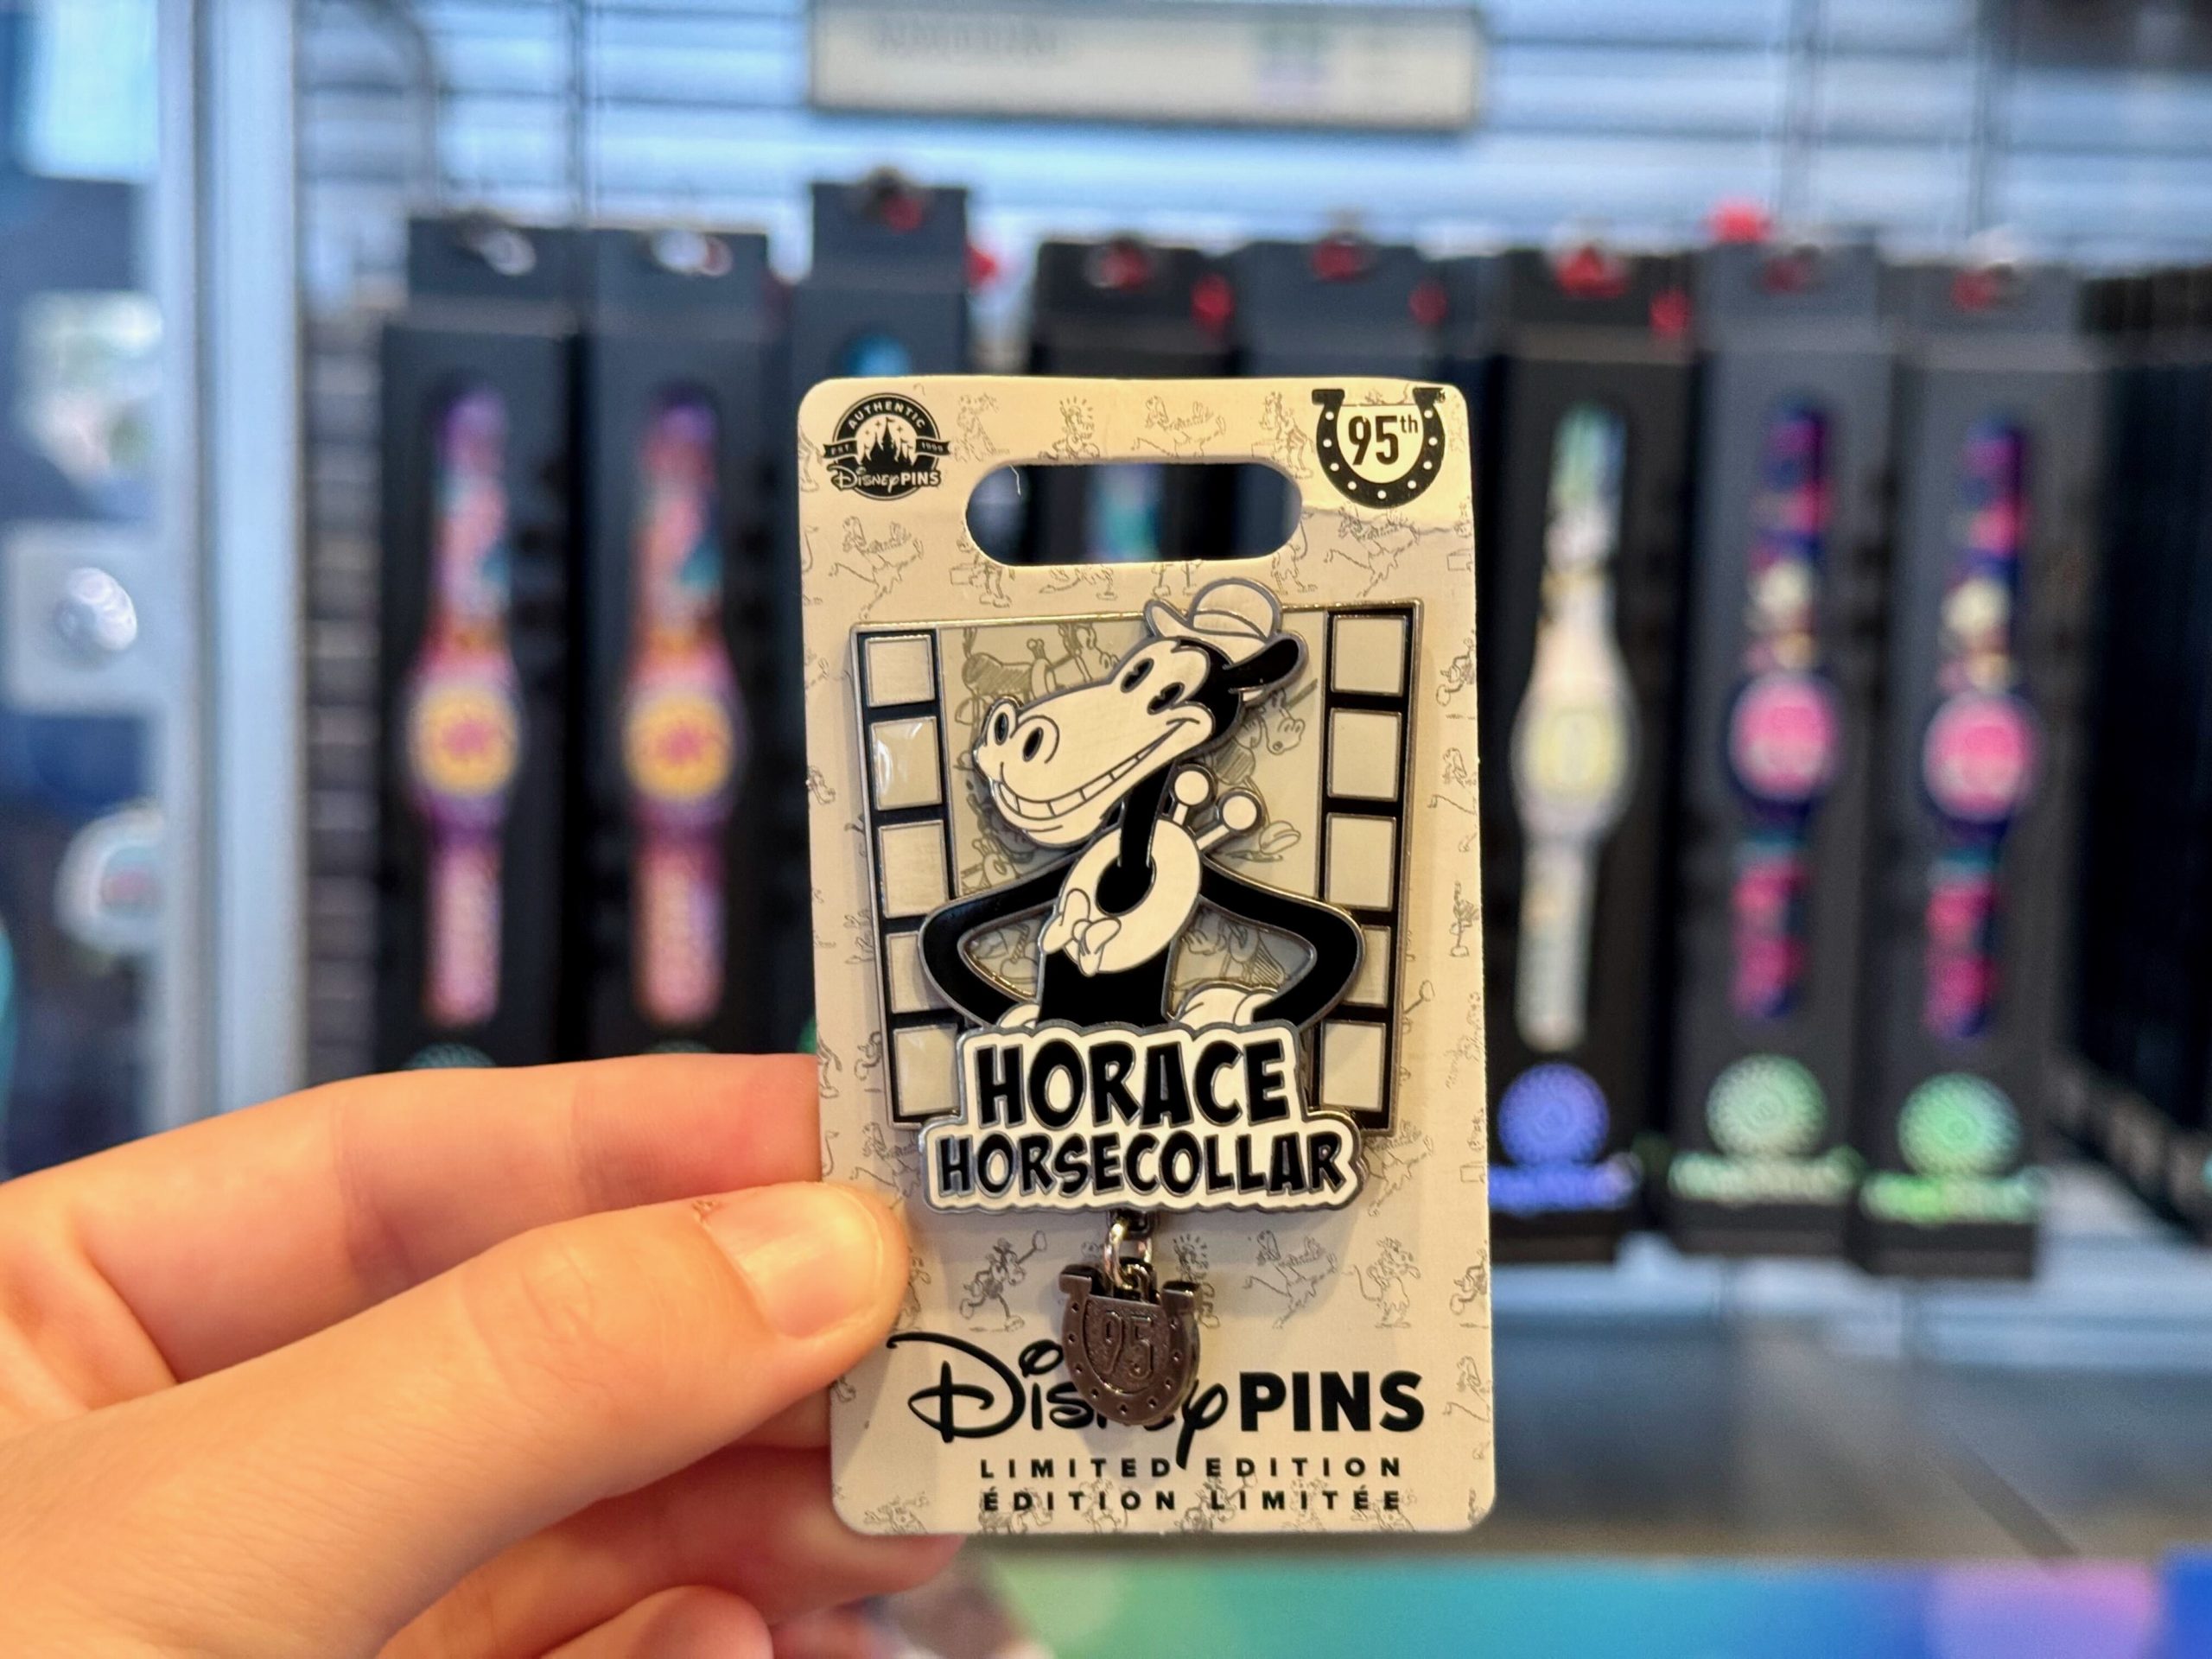 New Limited-Edition Trading Pins in EPCOT